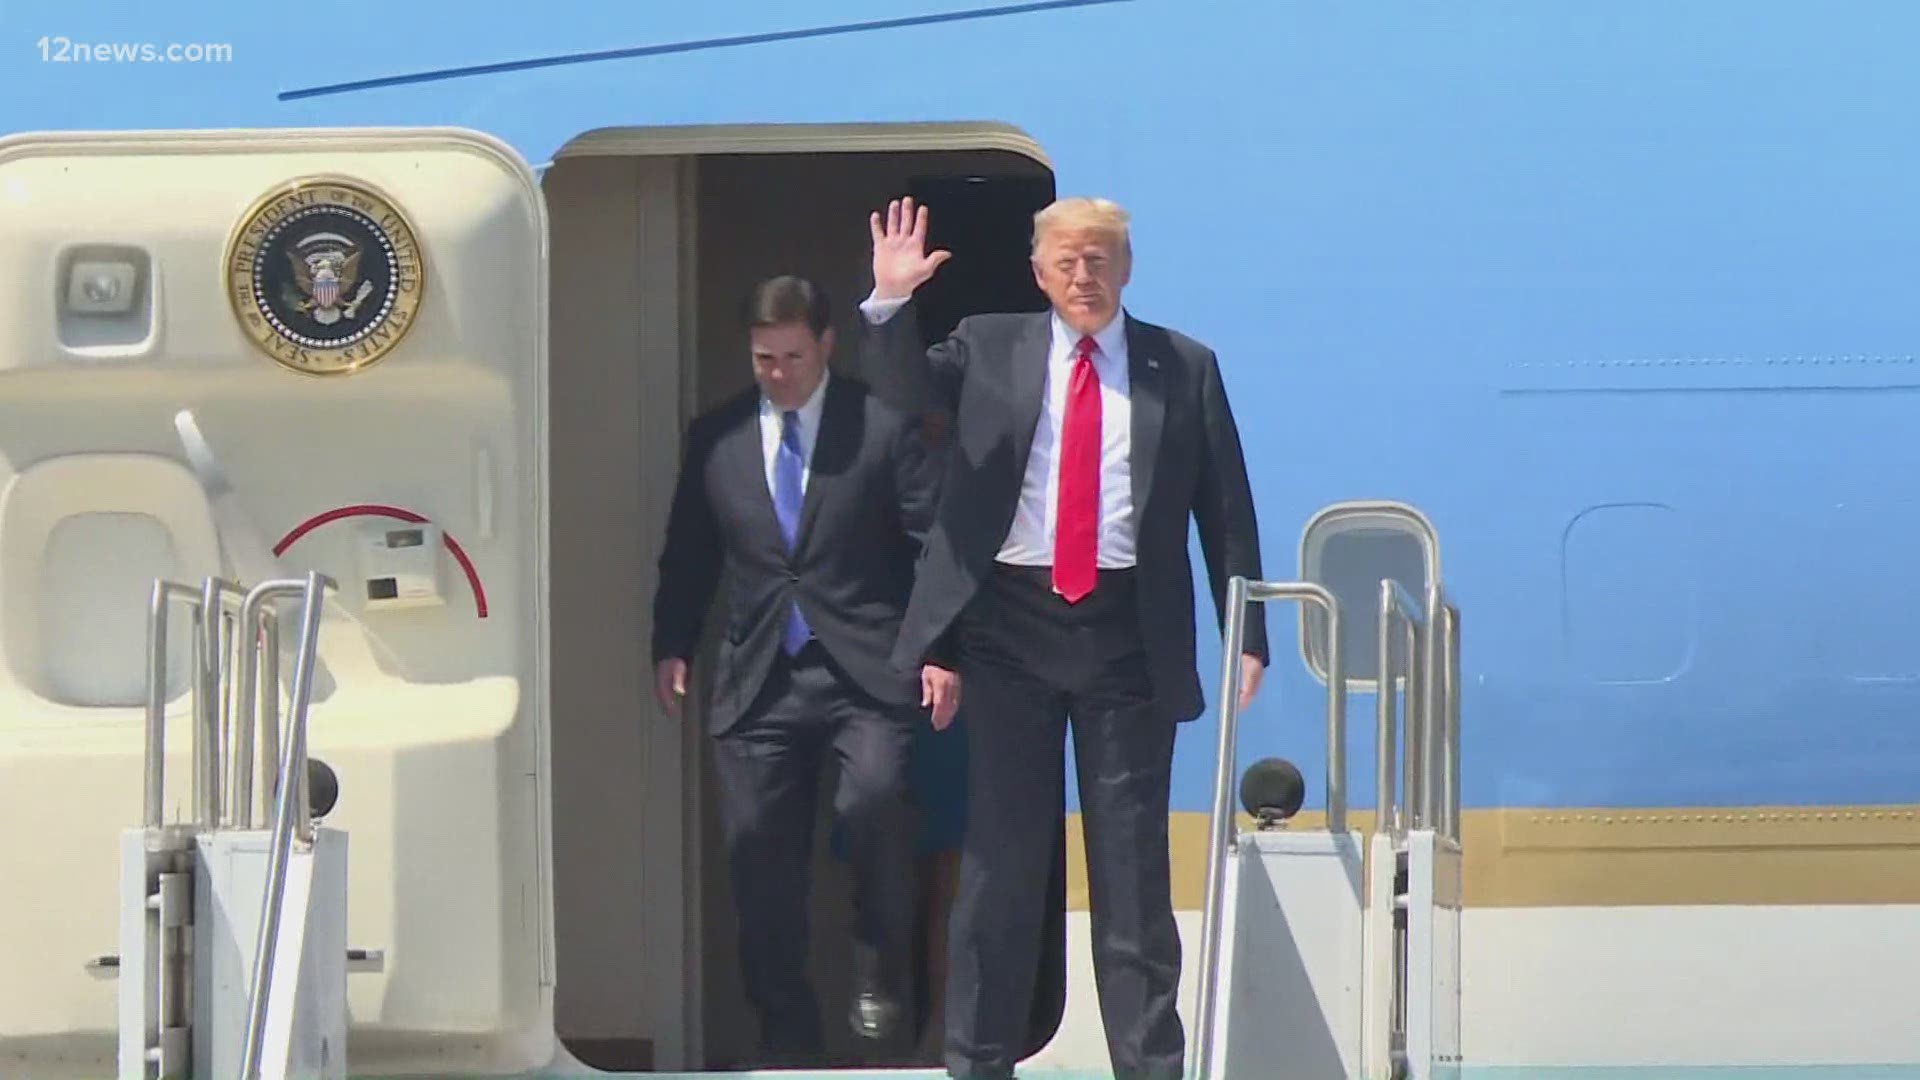 President Trump has landed at Sky Harbor Airport ahead of a rally at Dream City Church in Phoenix. Trump was in Yuma earlier in the day to tour the border wall.